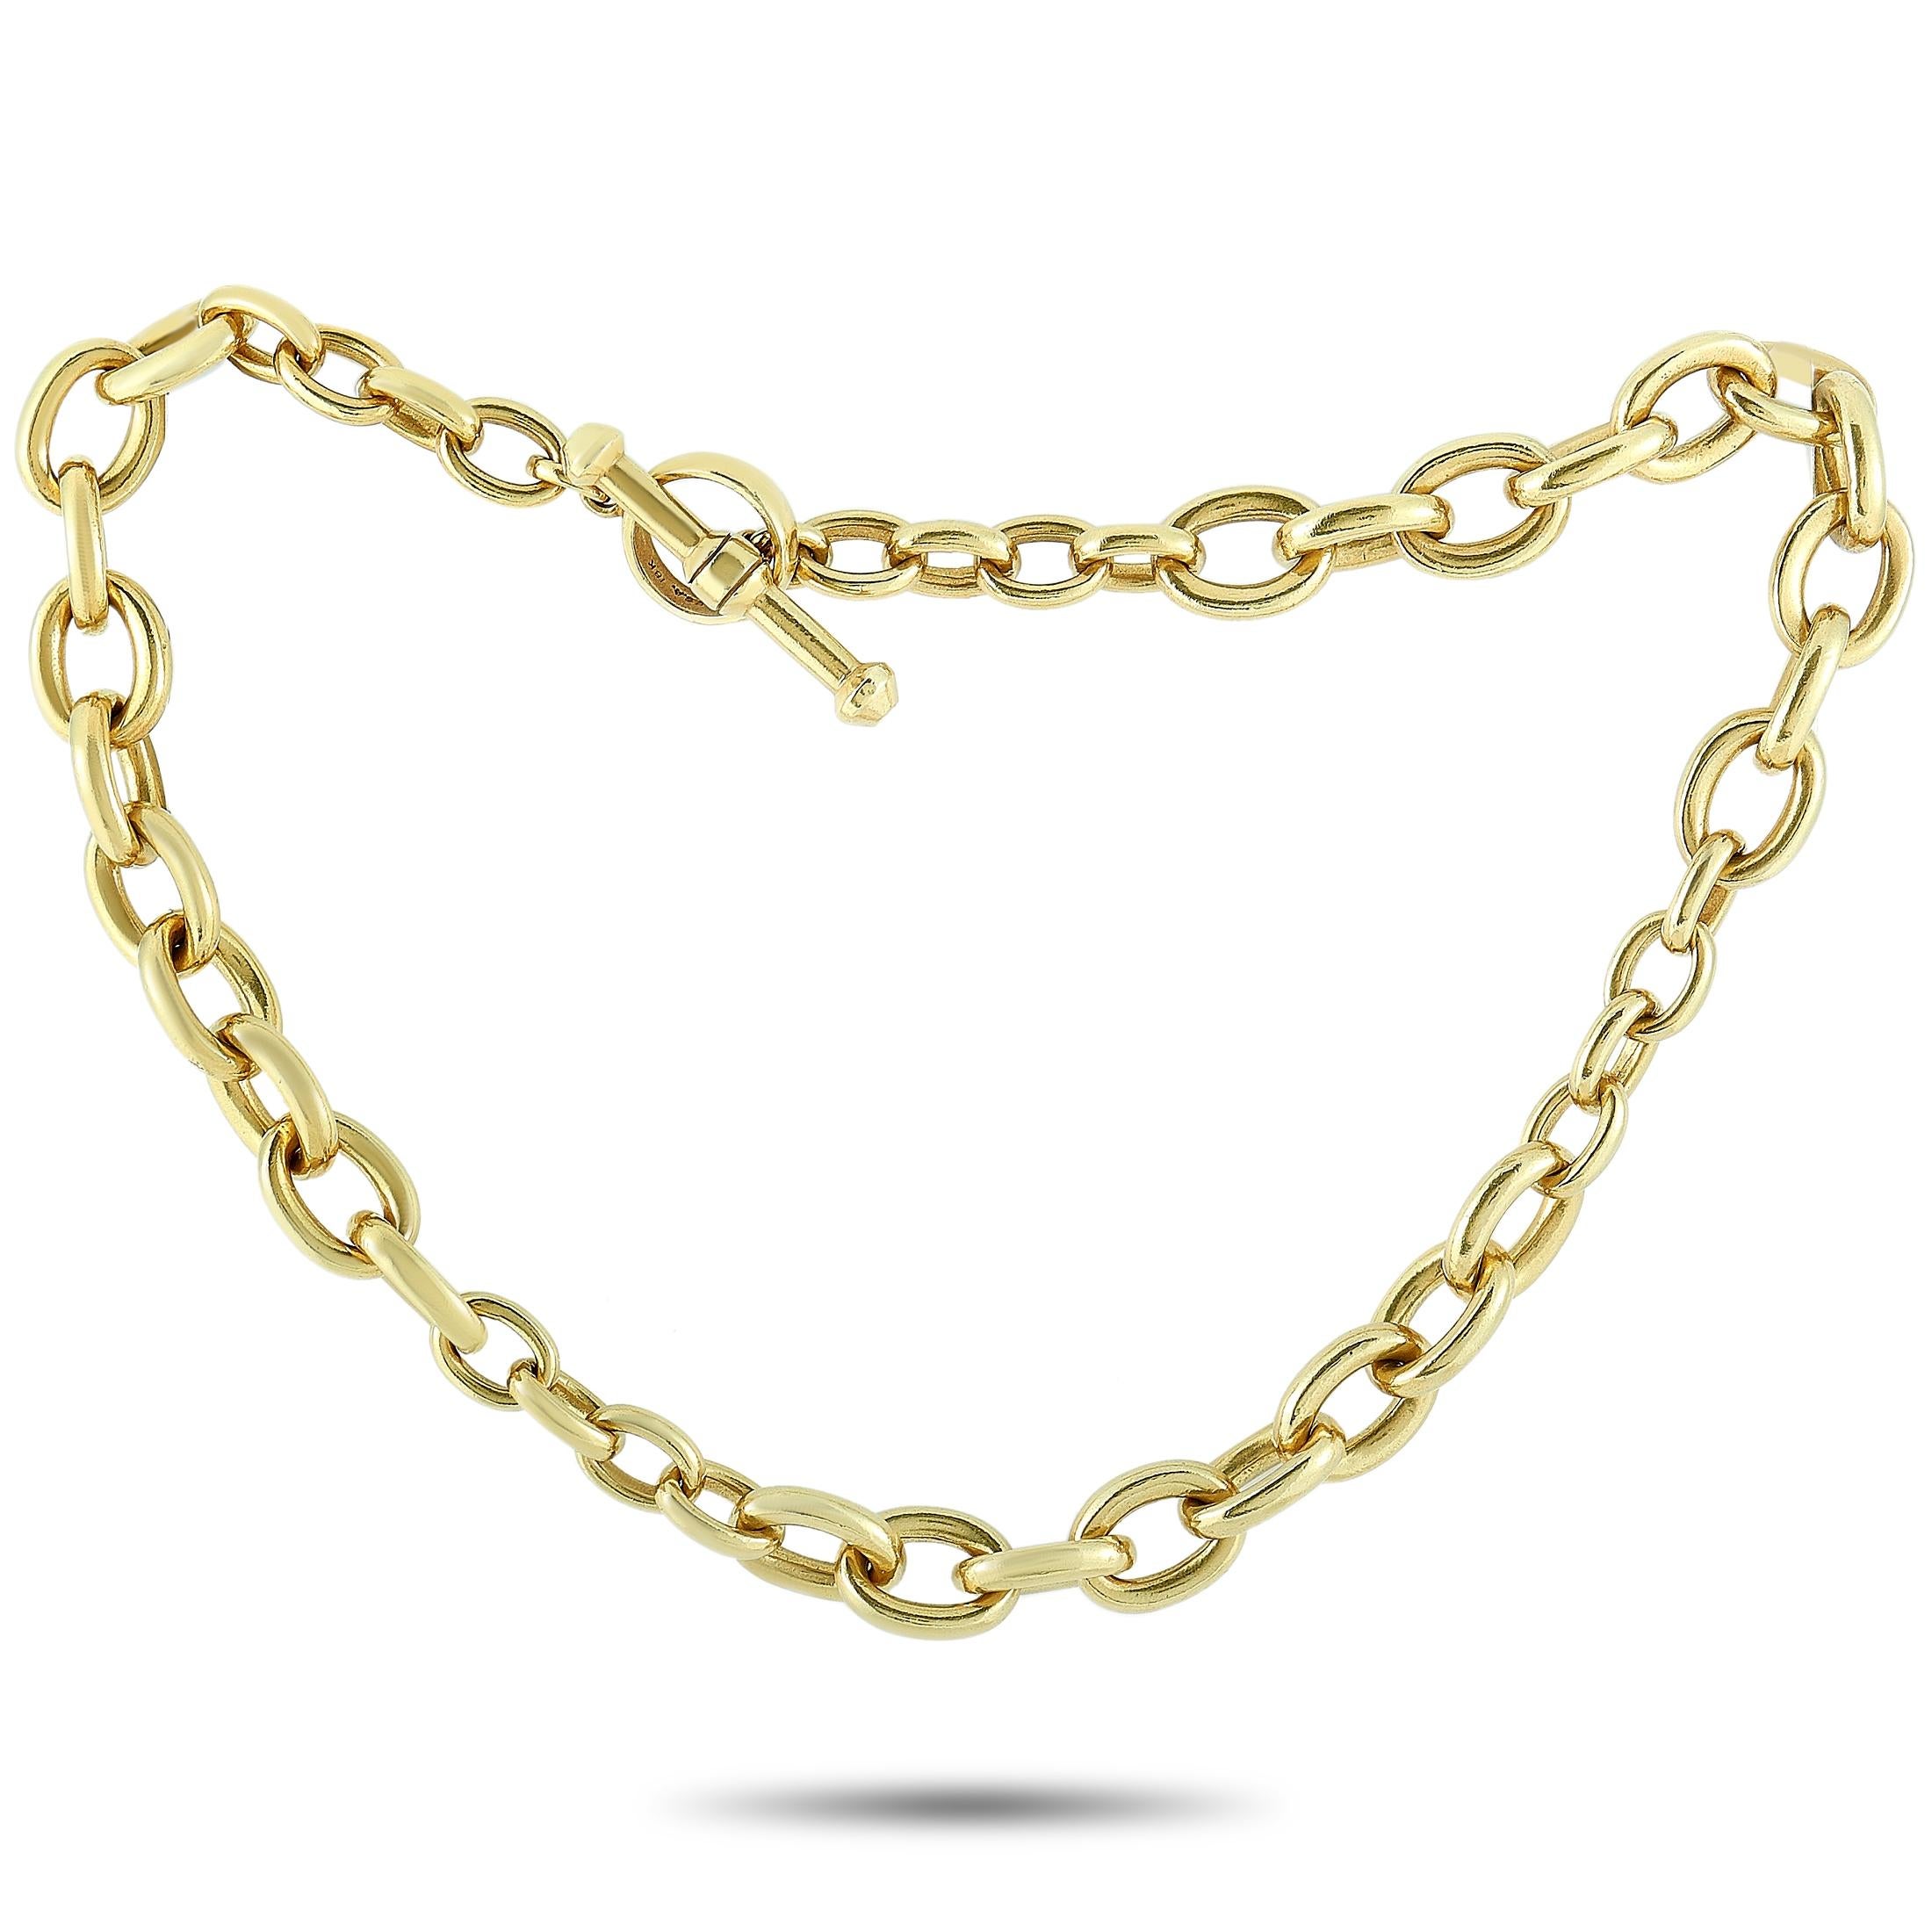 The Kieselstein-Cord “Hampton” necklace is crafted from 18K yellow gold and weighs 198.7 grams, measuring 18” in length.